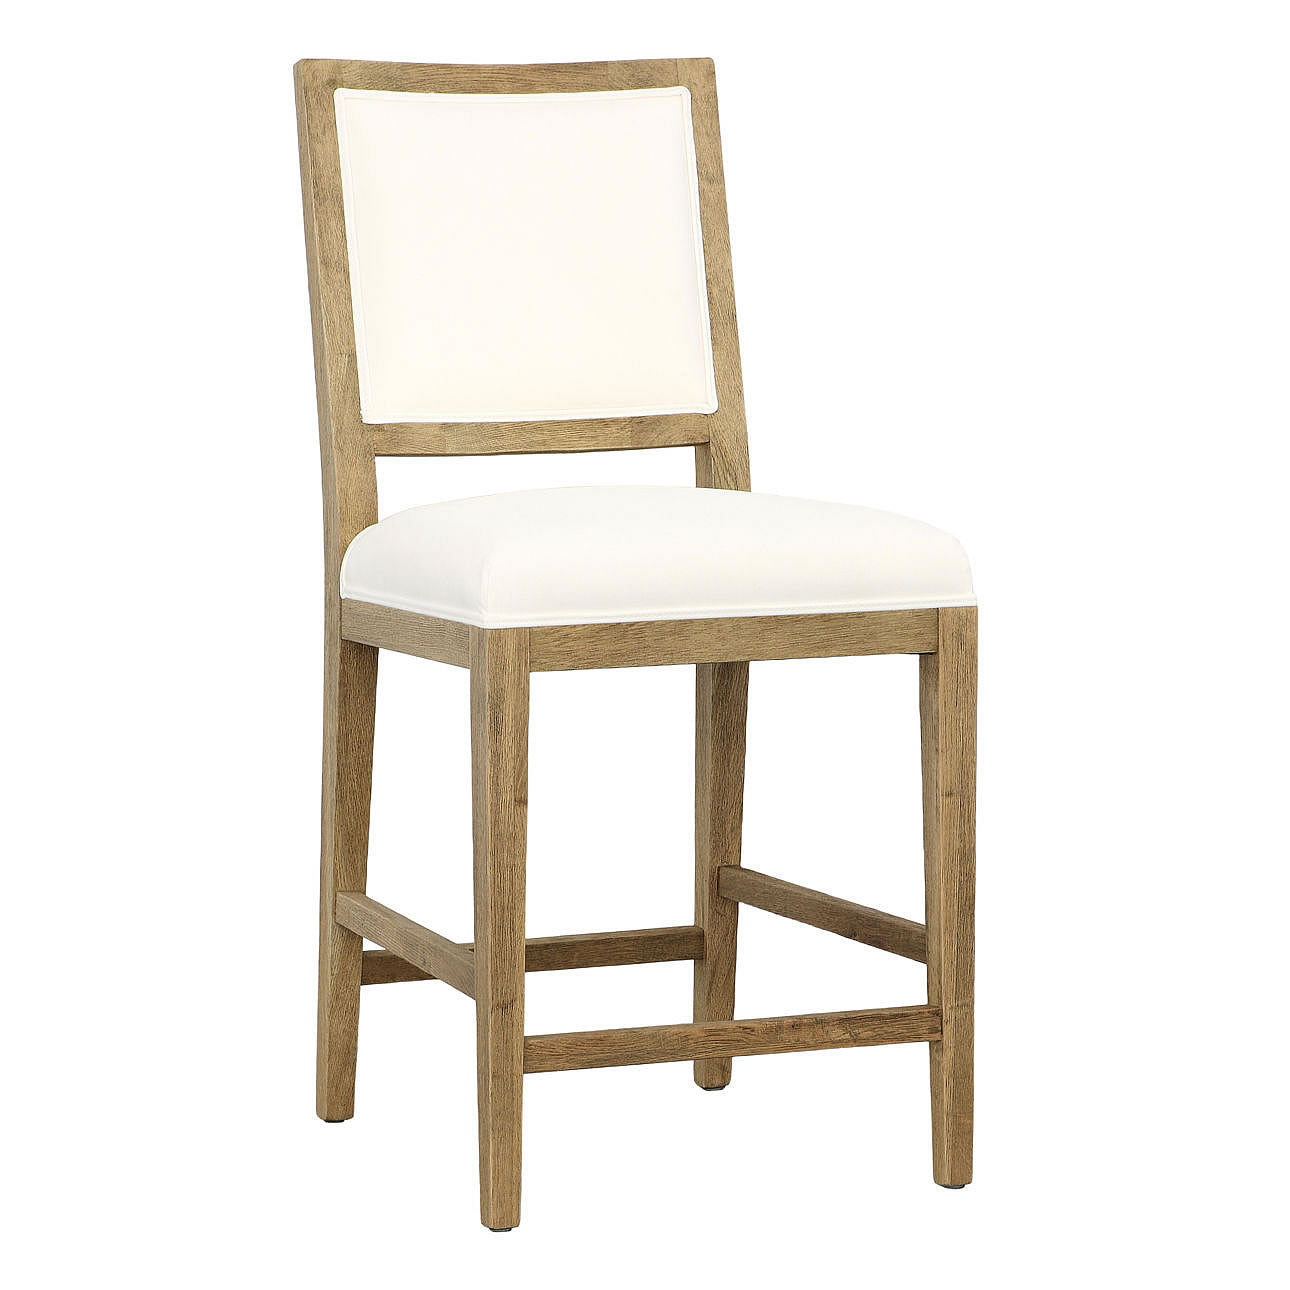 PAIR Croft Barstools in White Cotton Blend Upholstery & Oak Wood Frame Hollywood